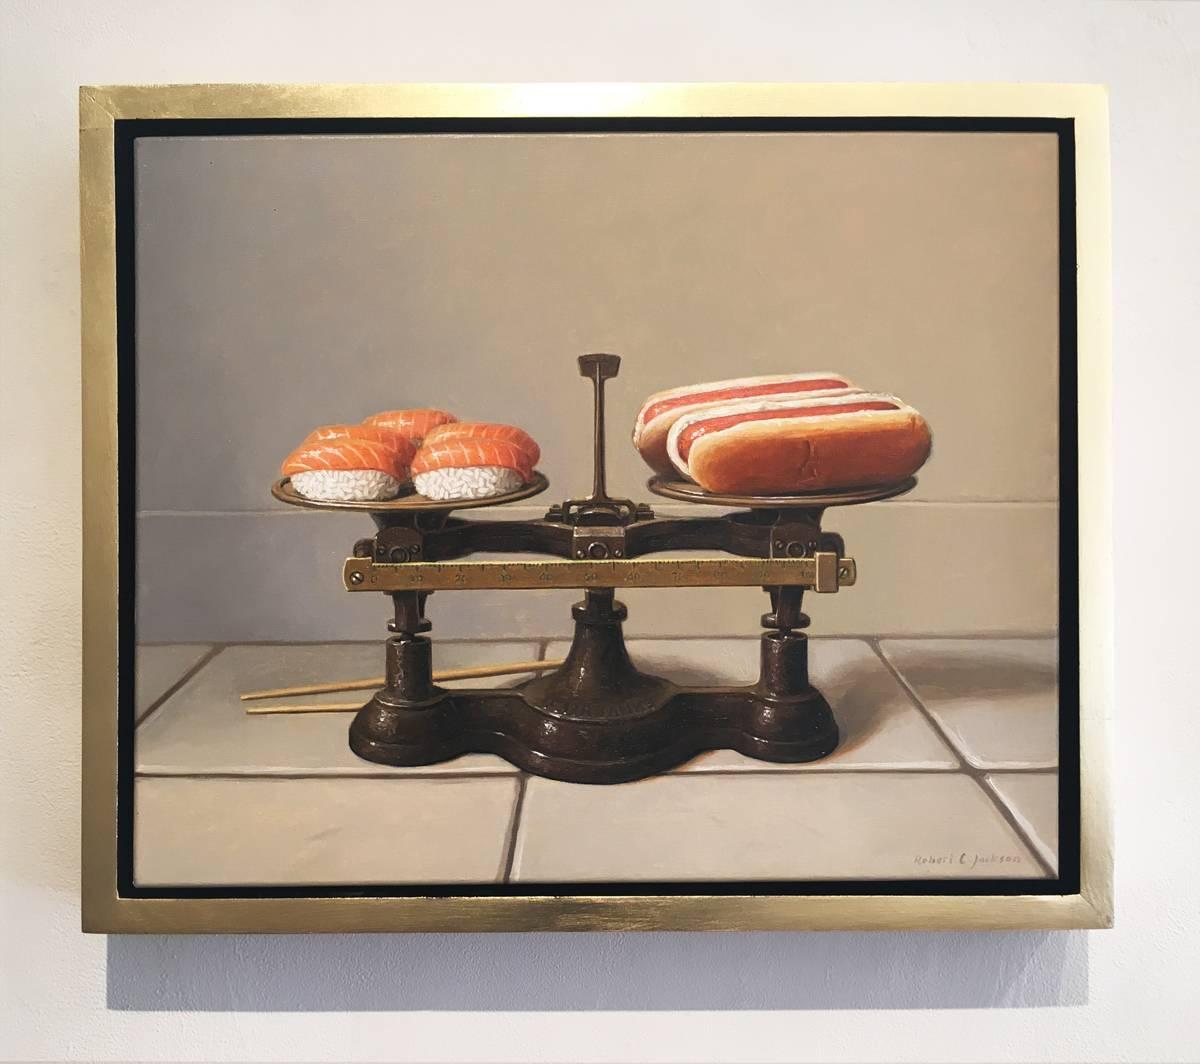 Oil on linen, 2016.
Signed by the artist on lower right, front.
Light maple float frame with 3/4 inch gold-leaf face.

This is an original work of art made by mid-career artist Robert C. Jackson. By employing playful objects such as cakes and candy,